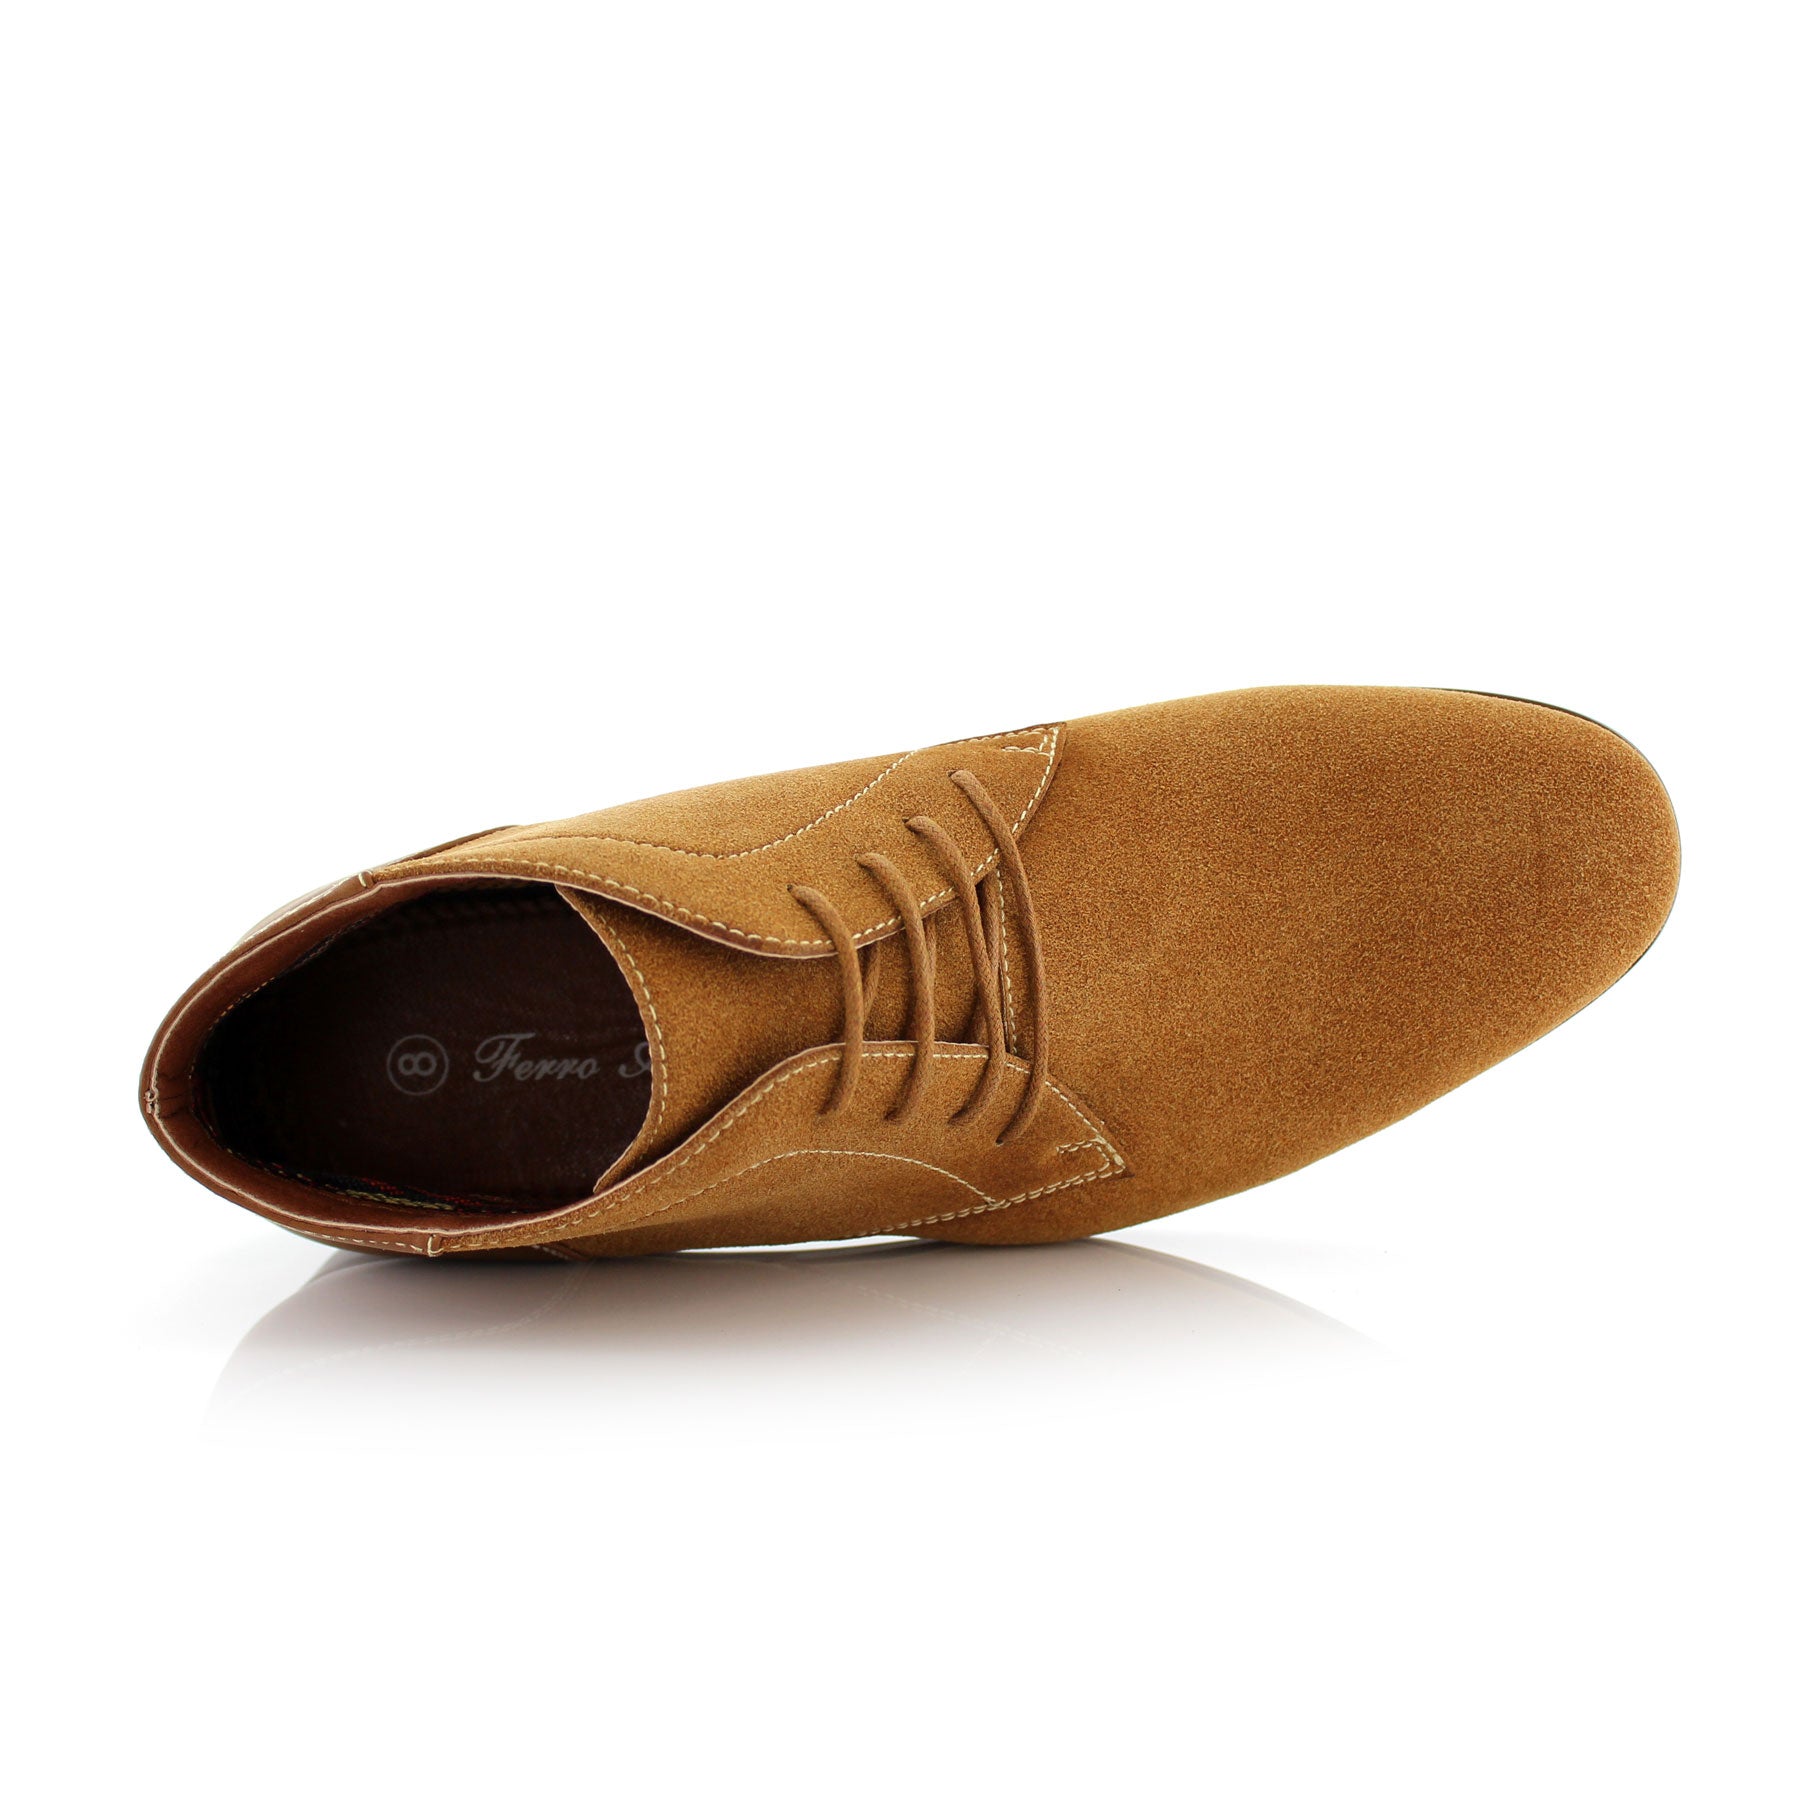 Suede Chukka Boots | Raymond by Ferro Aldo | Conal Footwear | Top-Down Angle View